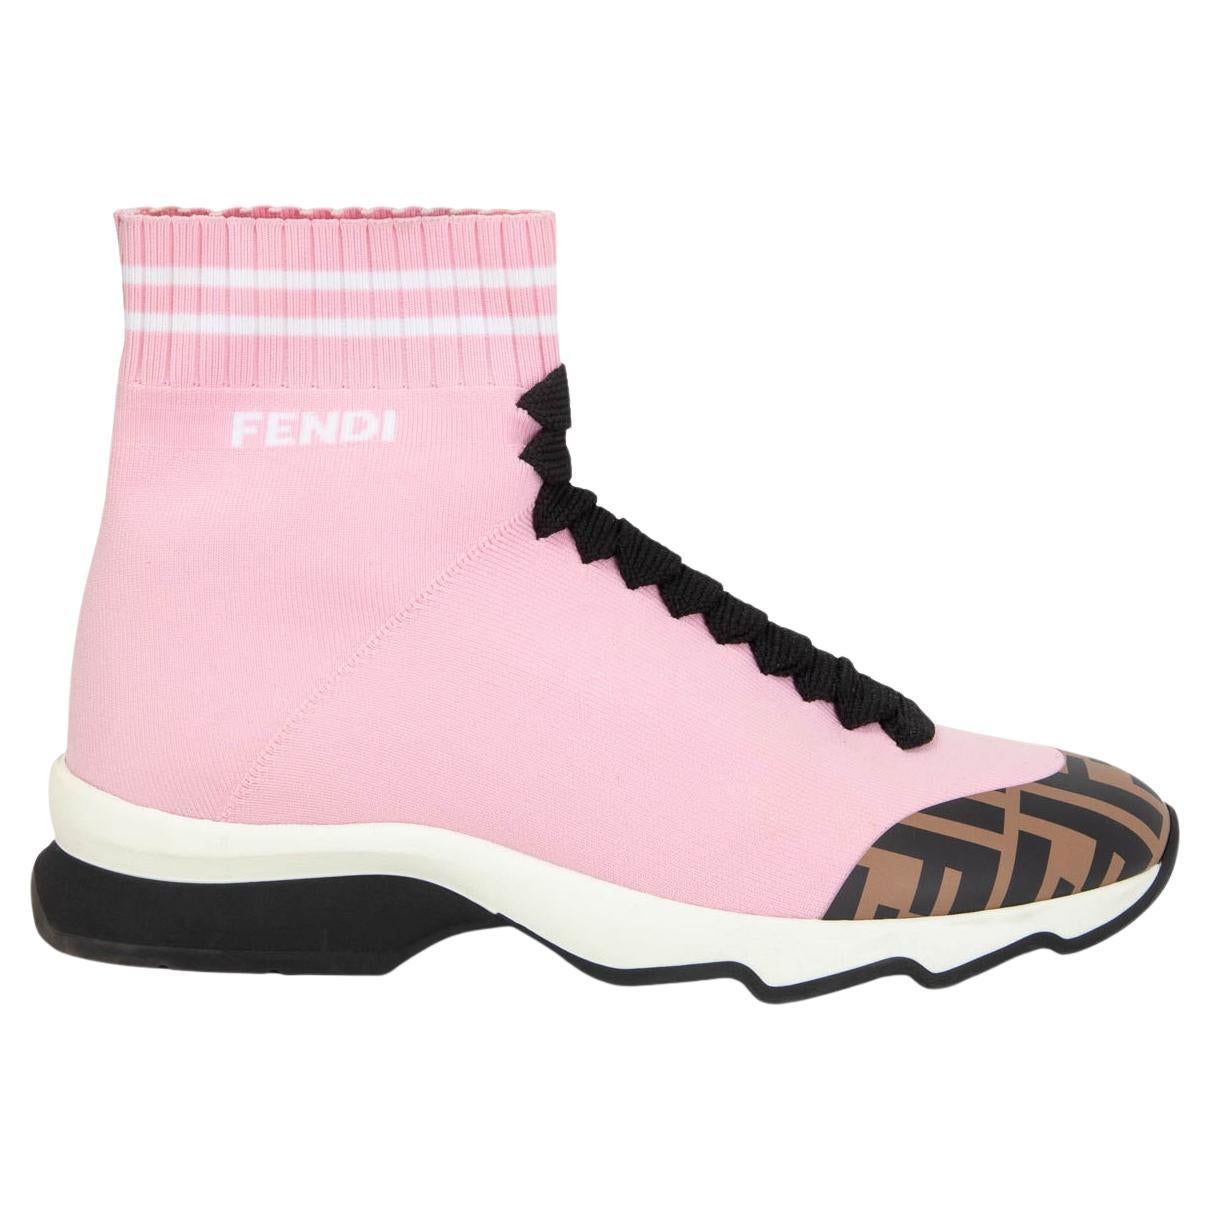 Timberland Linden Woods Boot - Top Sock Shoes Balance Are Available Now in  New Styles – Fonjep News - Fendi's High